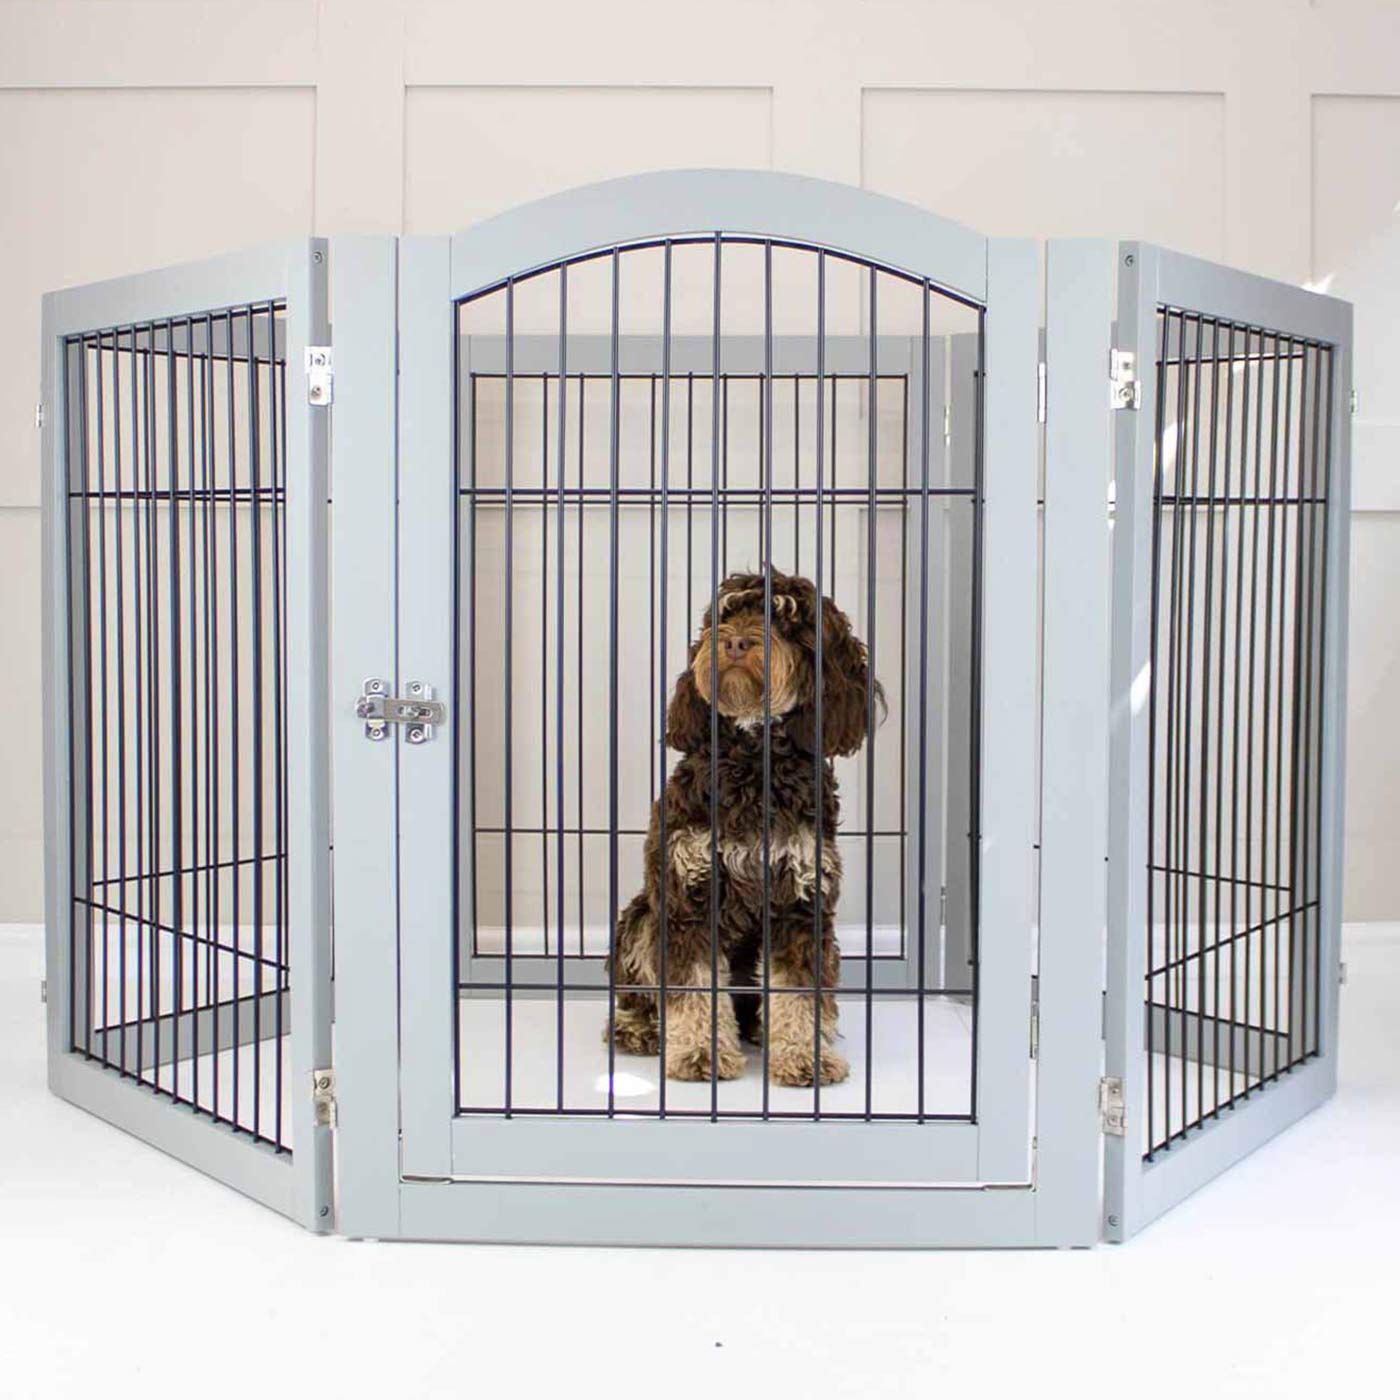 [color:grey] Ensure The Ultimate Puppy Safety with Our Heavy Duty Wooden Puppy Play Pen, Crafted to Take Your Pet Right Through Maturity! Powder Coated to Be Extra Hardwearing! 6 panels that are 80.5cm high! Available To Now at Lords & Labradors US